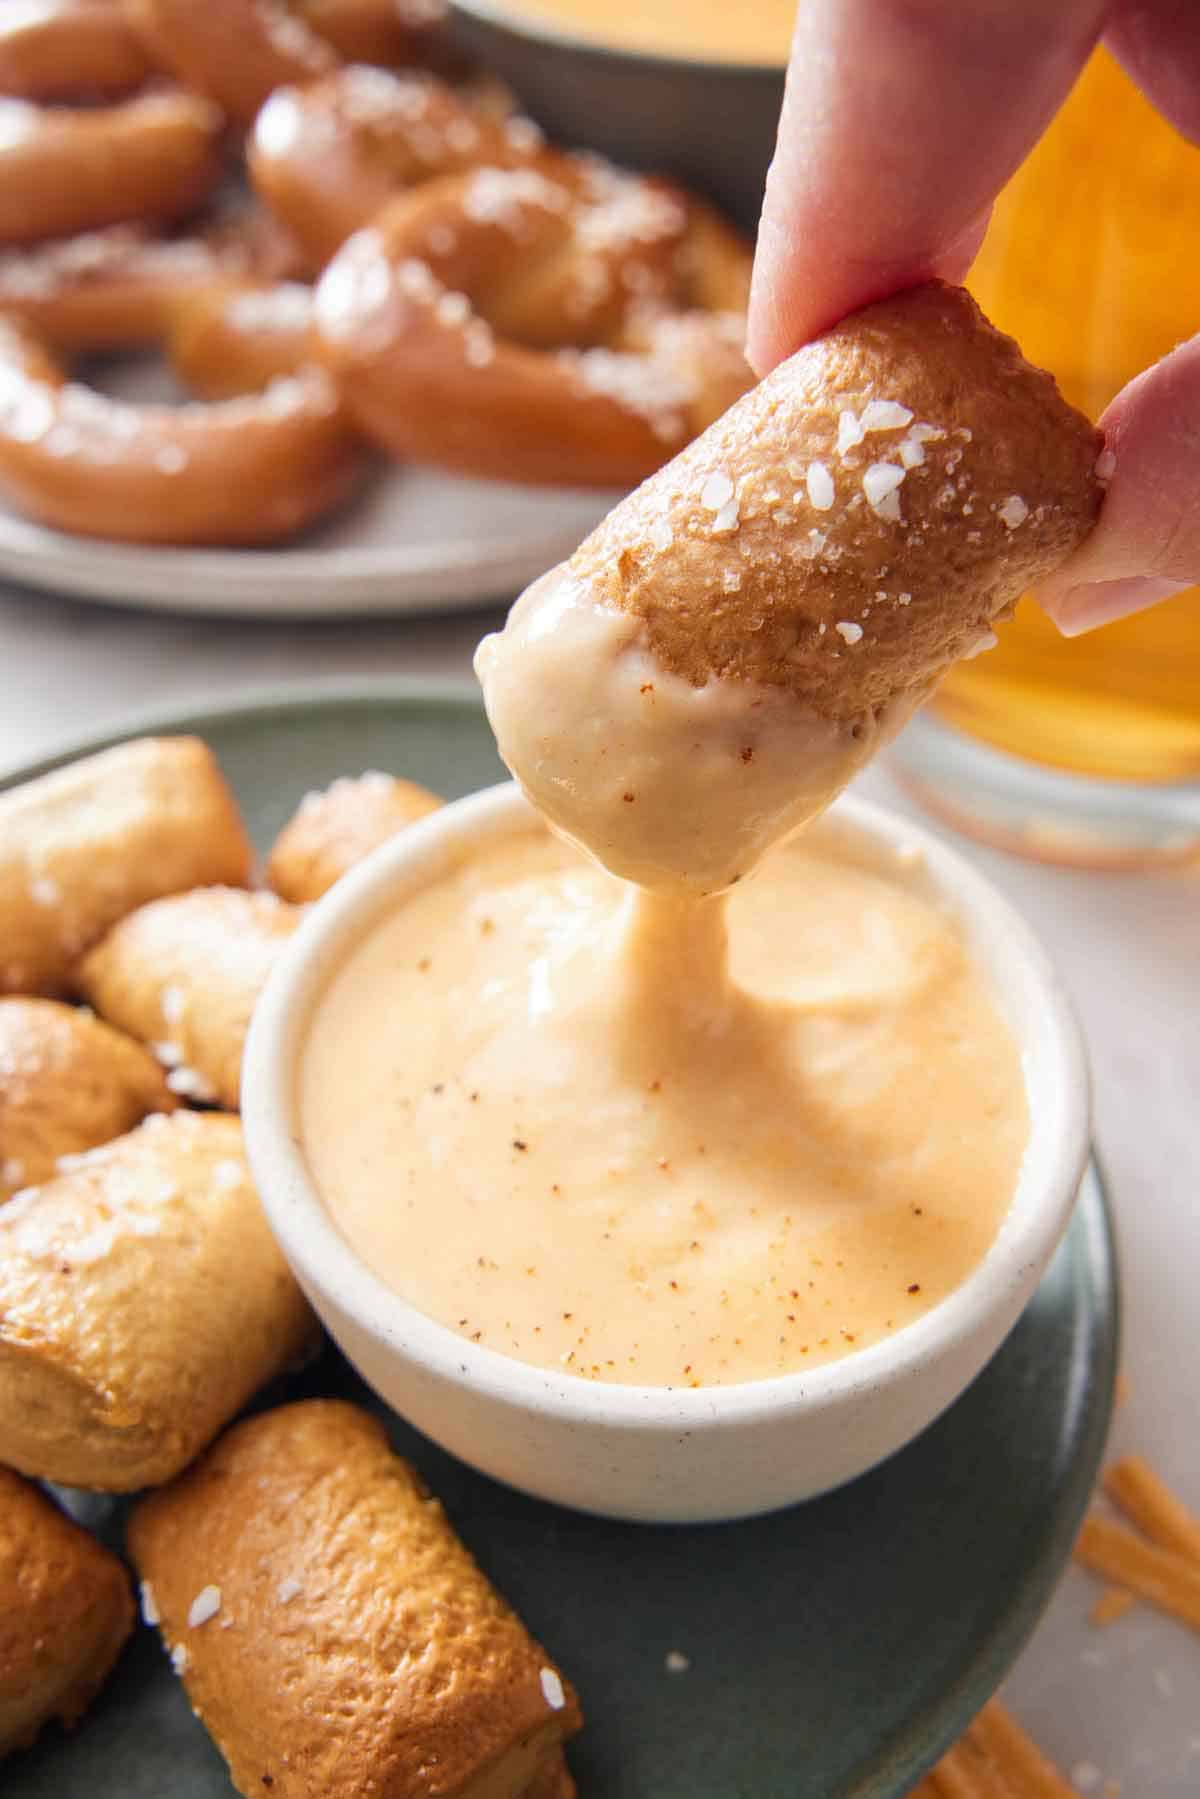 A pretzel bite dipped into a bowl of beer cheese dip.